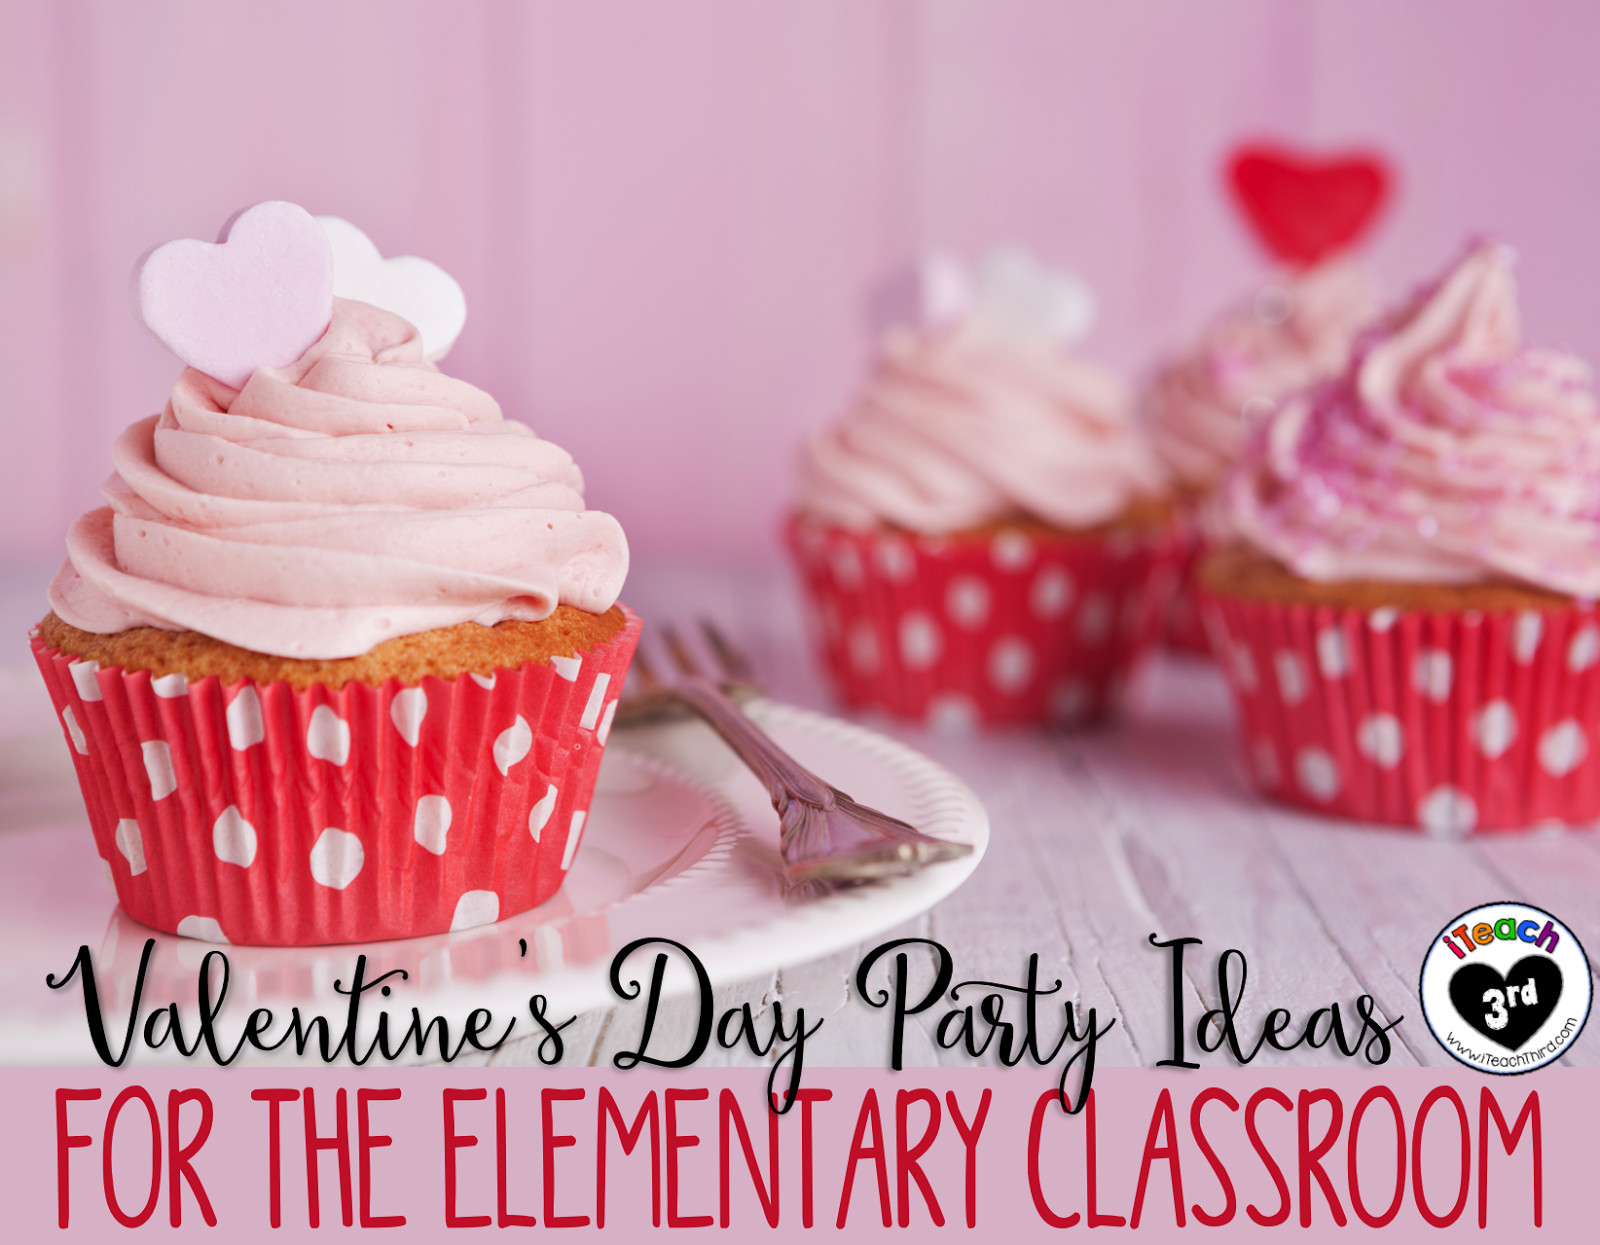 Valentines Day School Party Ideas
 Diary of a Not So Wimpy Teacher Valentine s Day Party Ideas